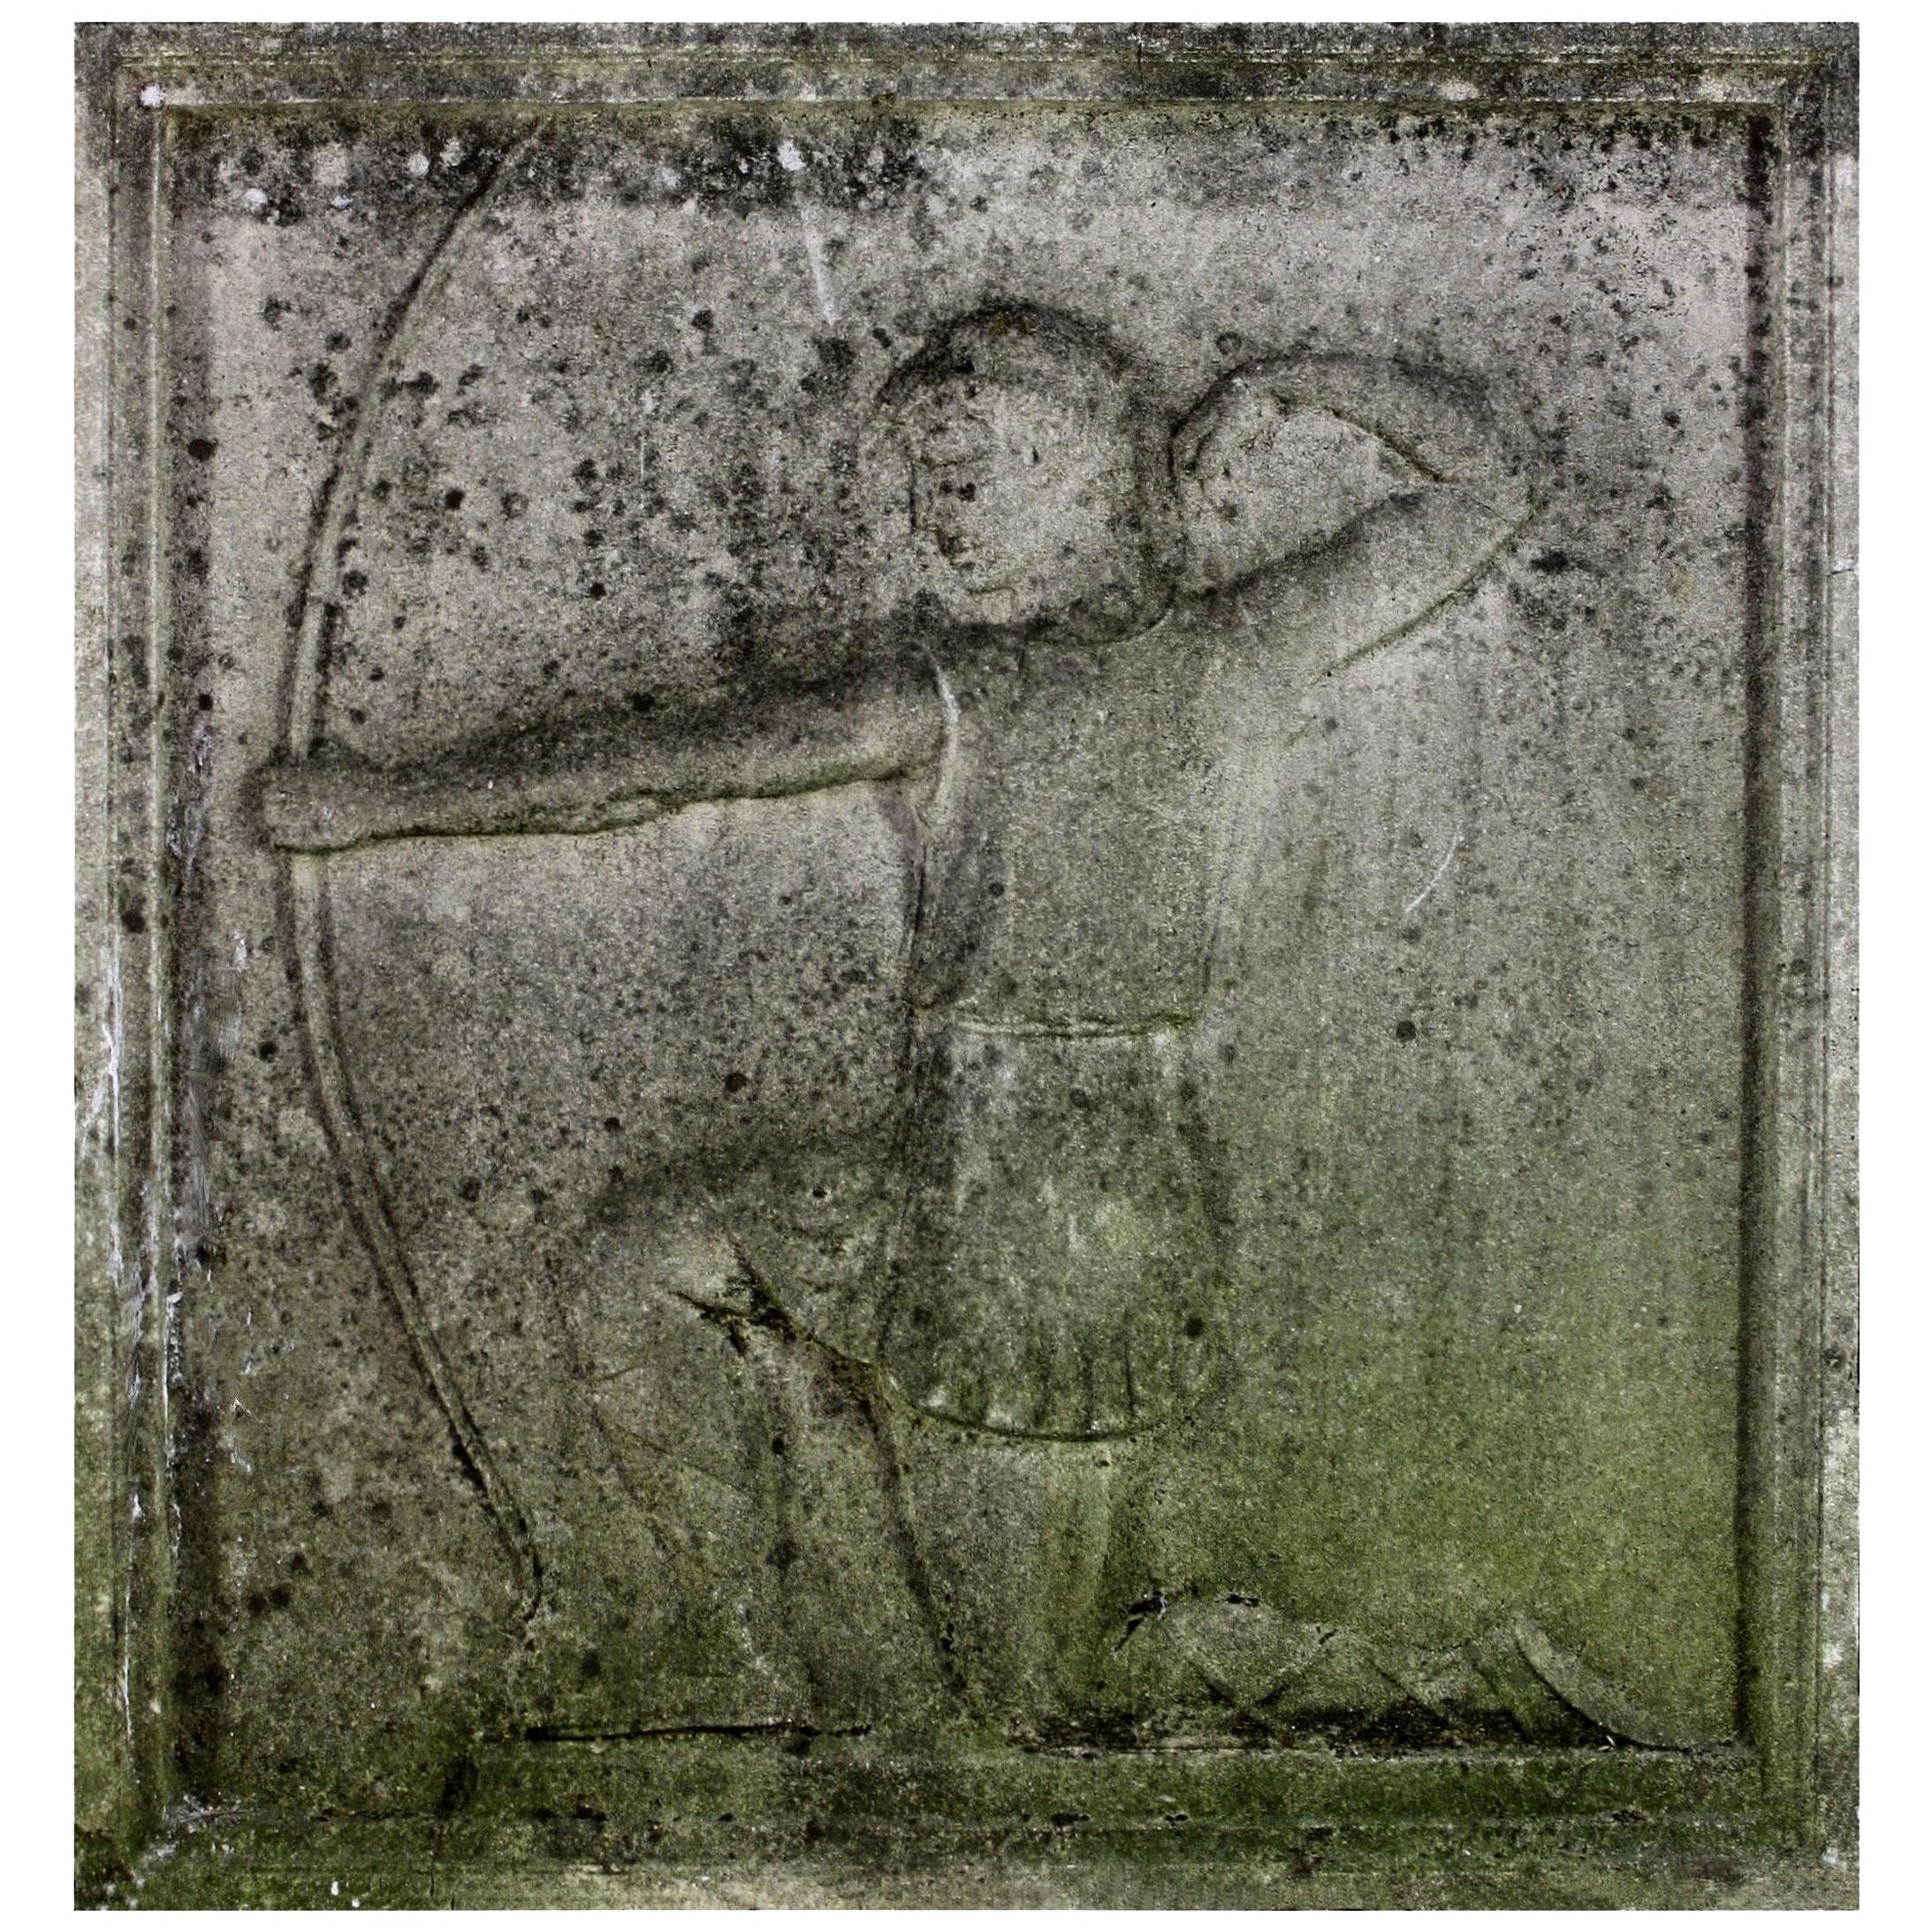 Stone Relief of an Archer